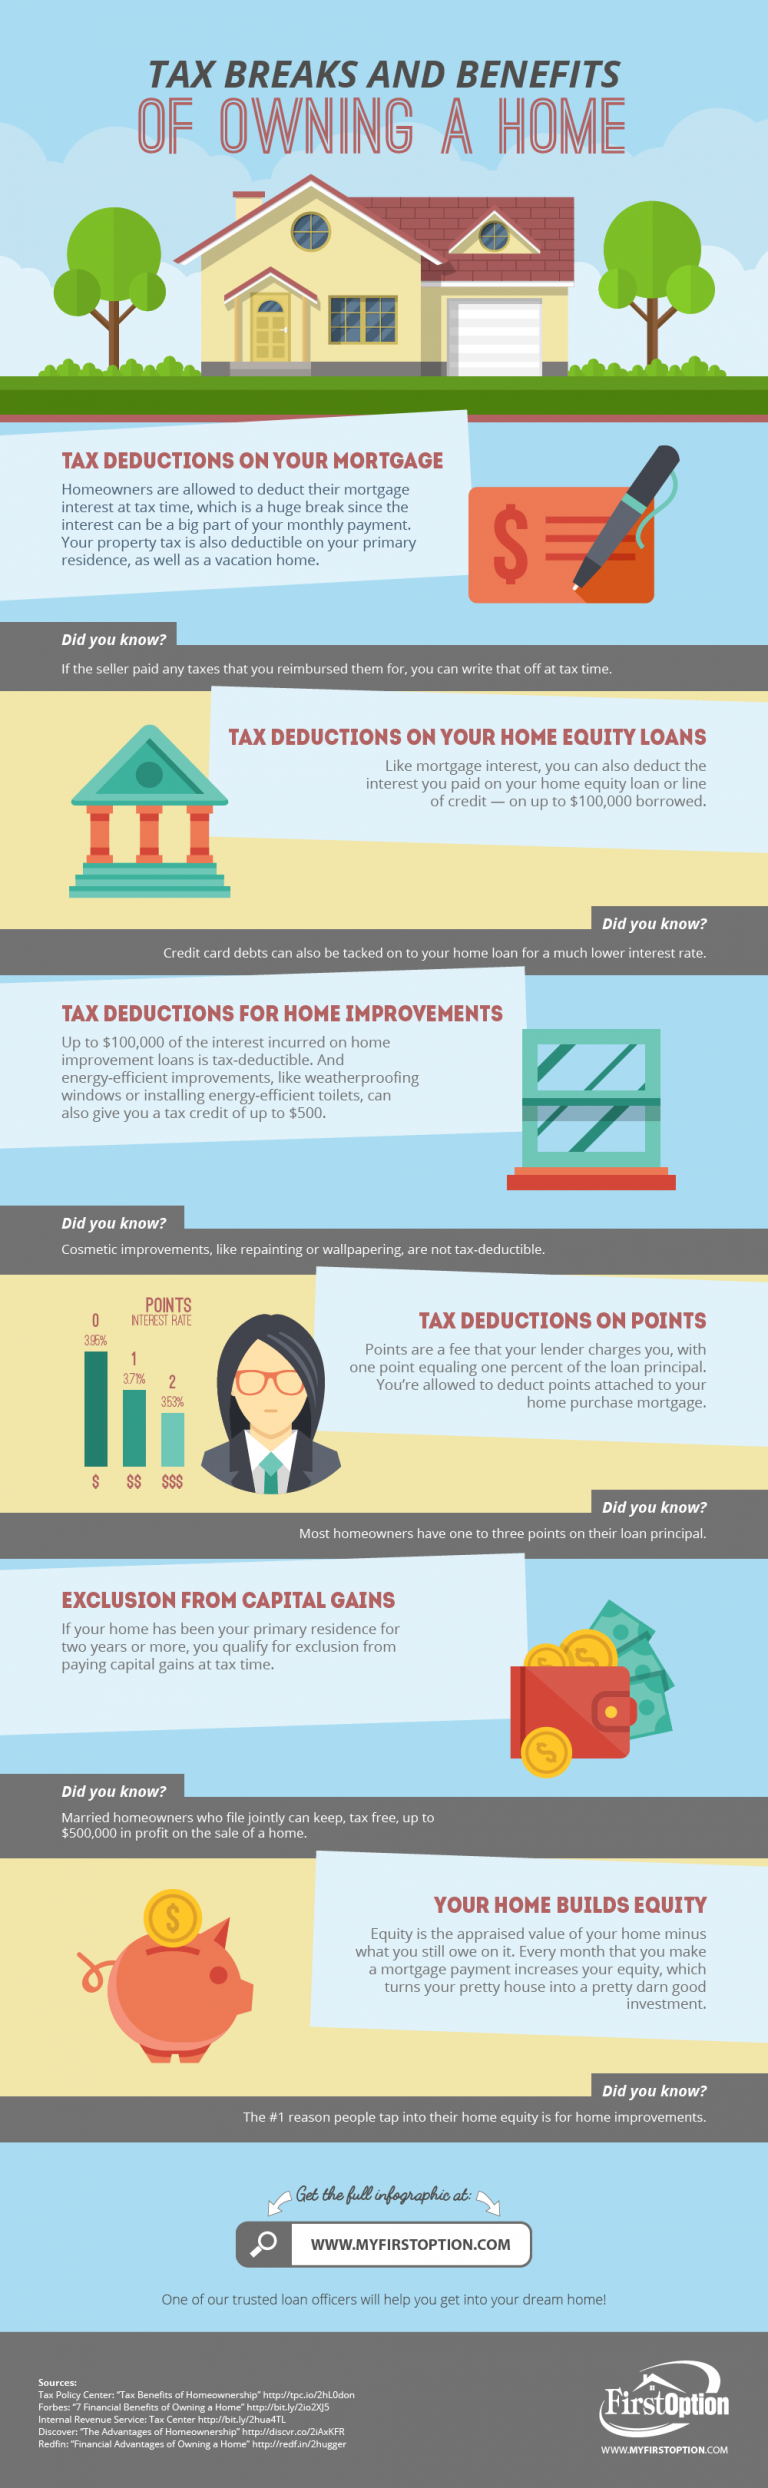 Tax Breaks and Benefits of Owning a Home